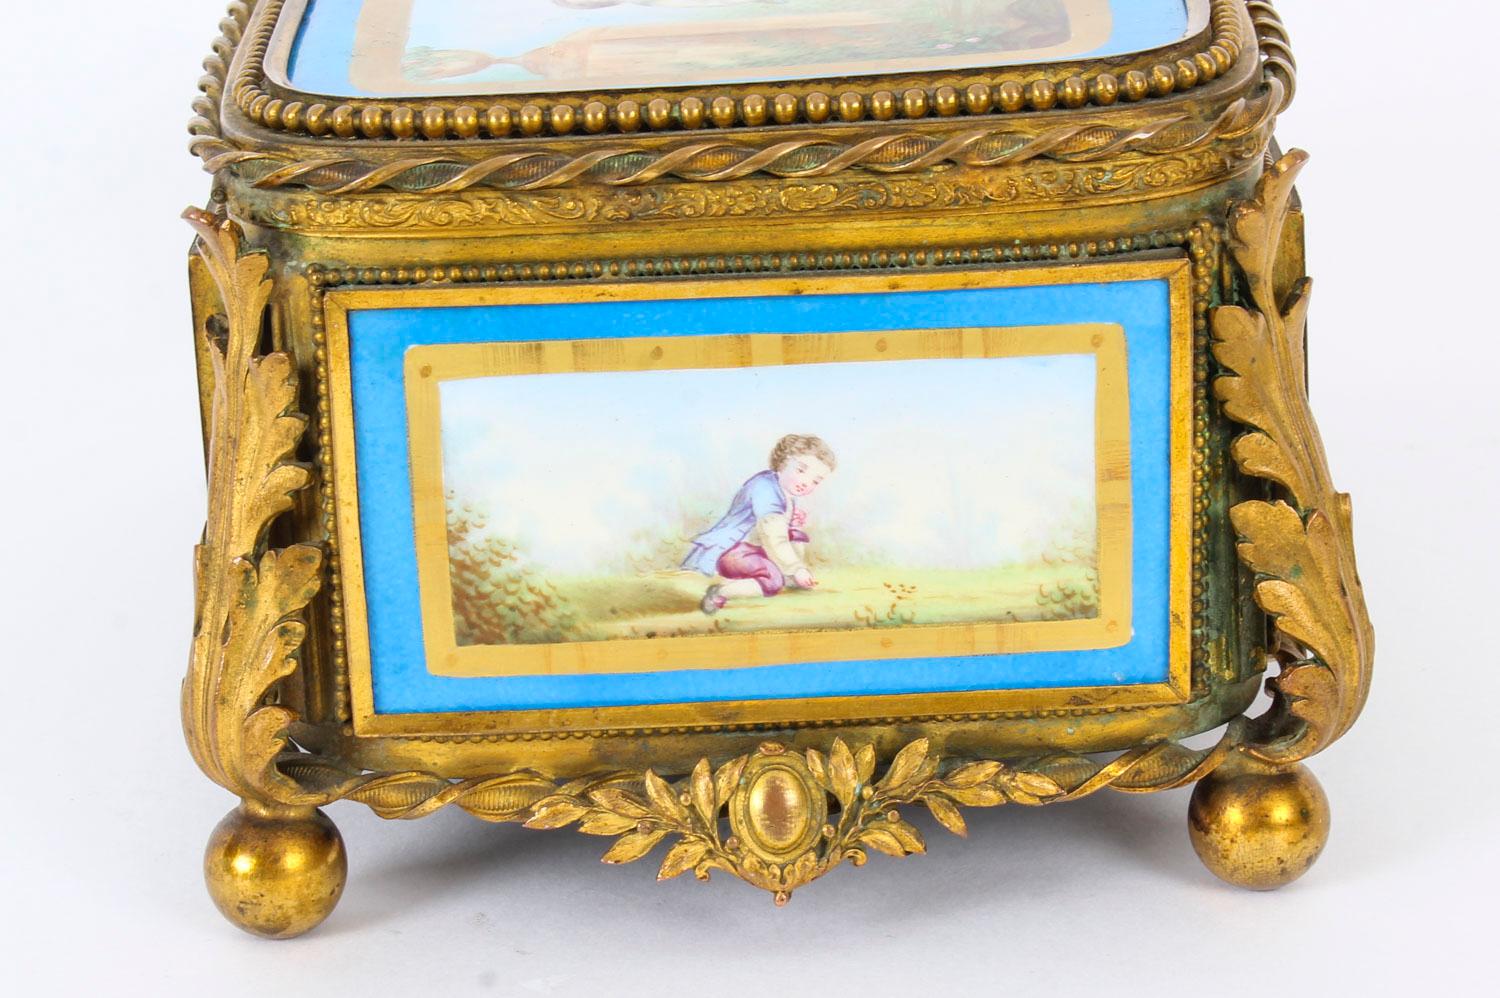 Antique French Sevres Porcelain and Ormolu Jewellery Casket 19th Century  For Sale 6